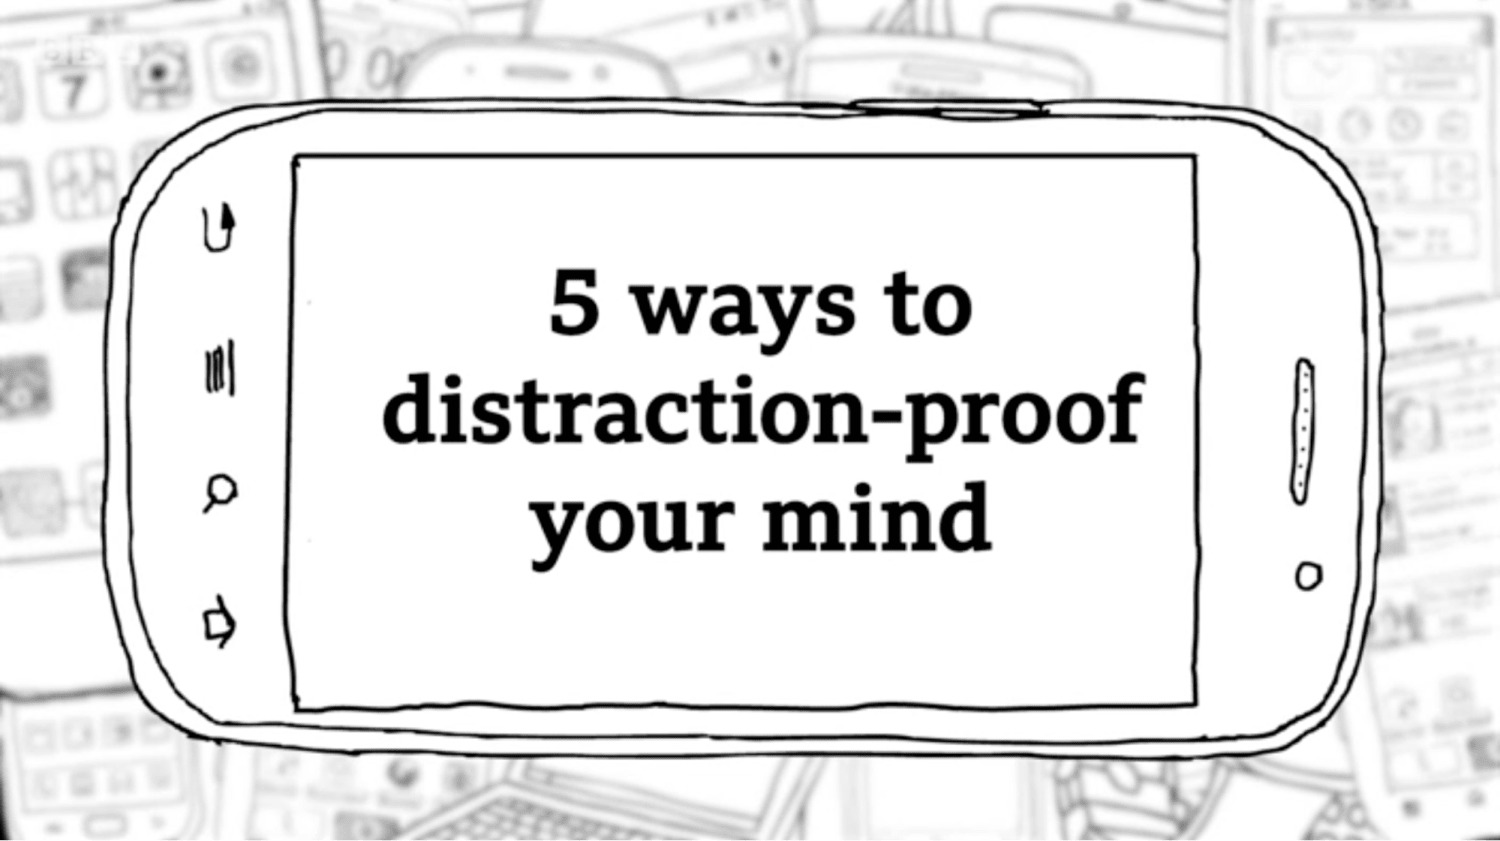 5 Ways to Distraction-Proof Your Mind